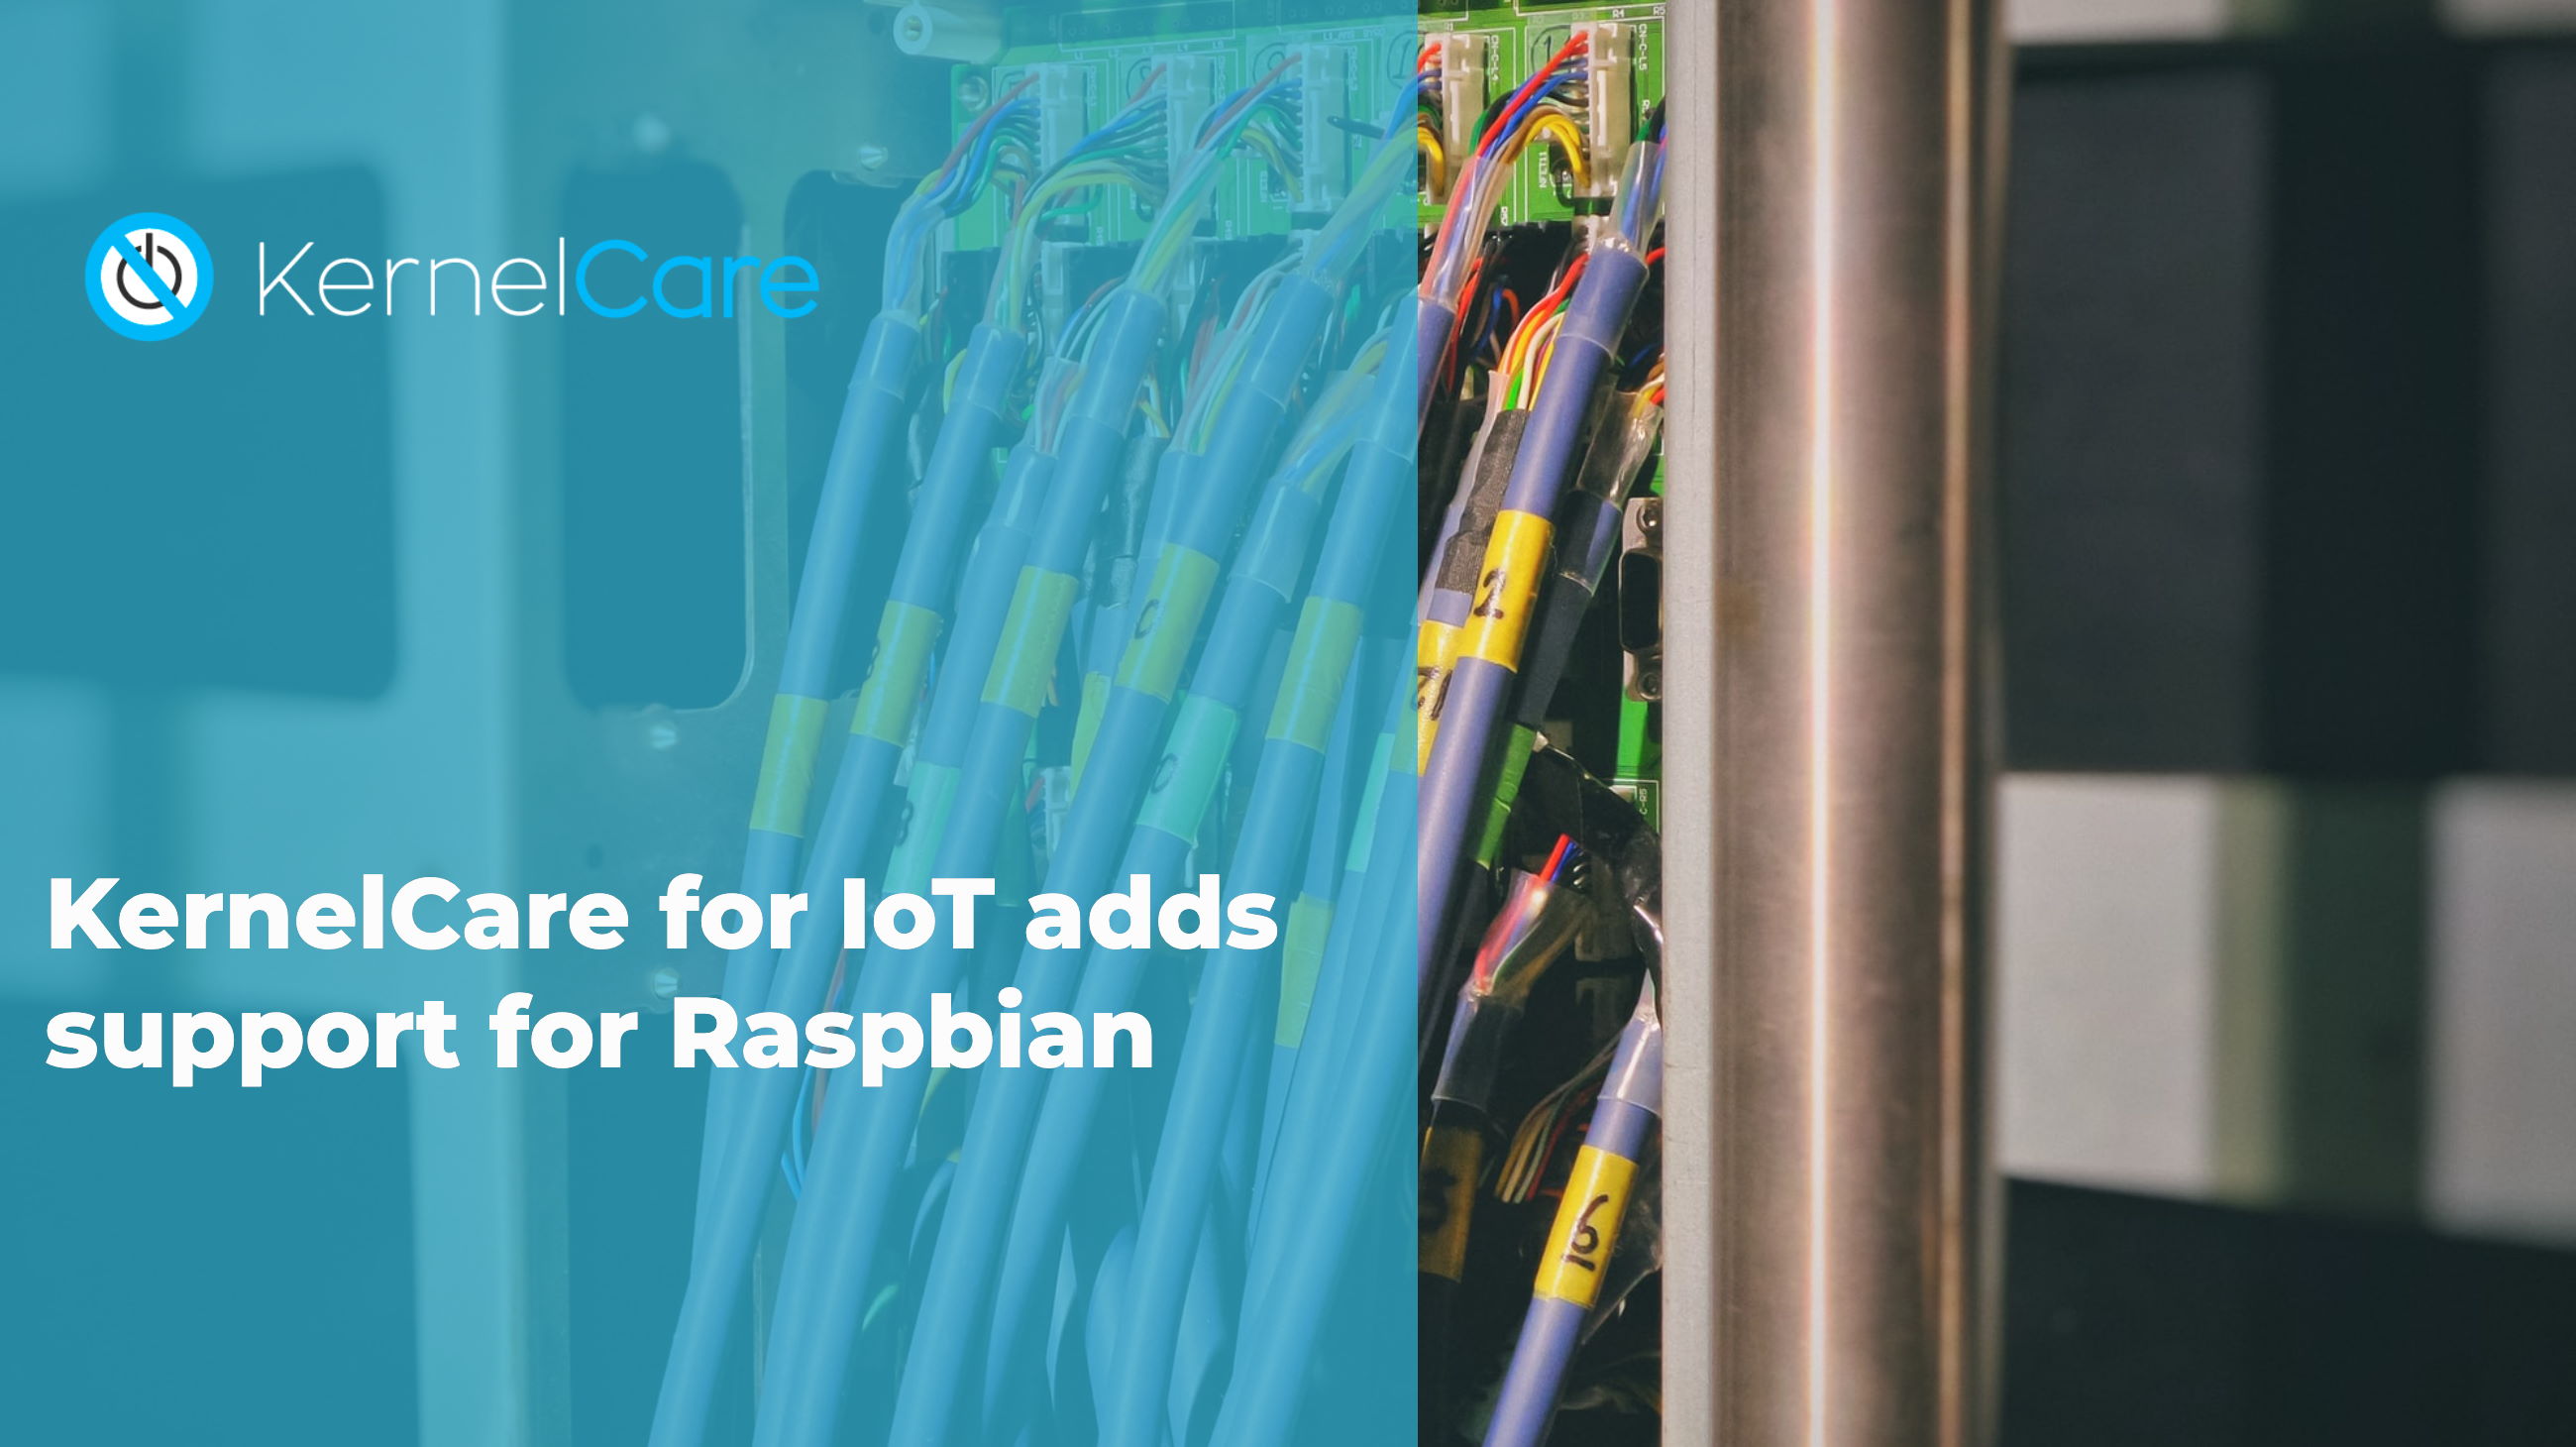 KernelCare for IoT adds support for Raspbian